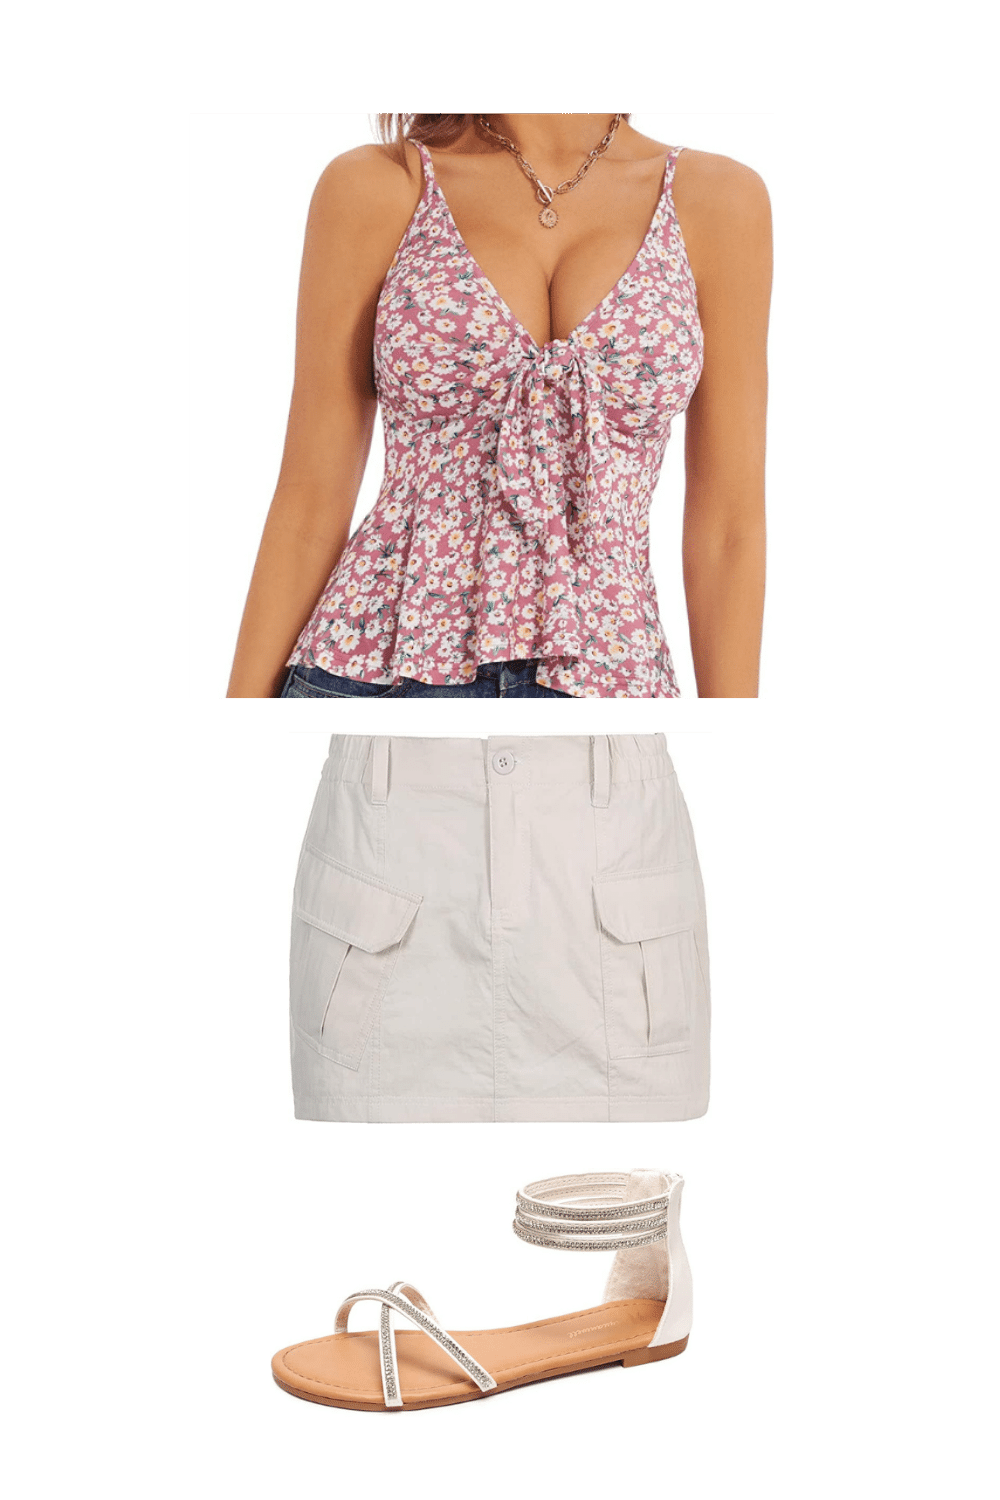 Cargo Skirt Outfits - Trendy and Practical